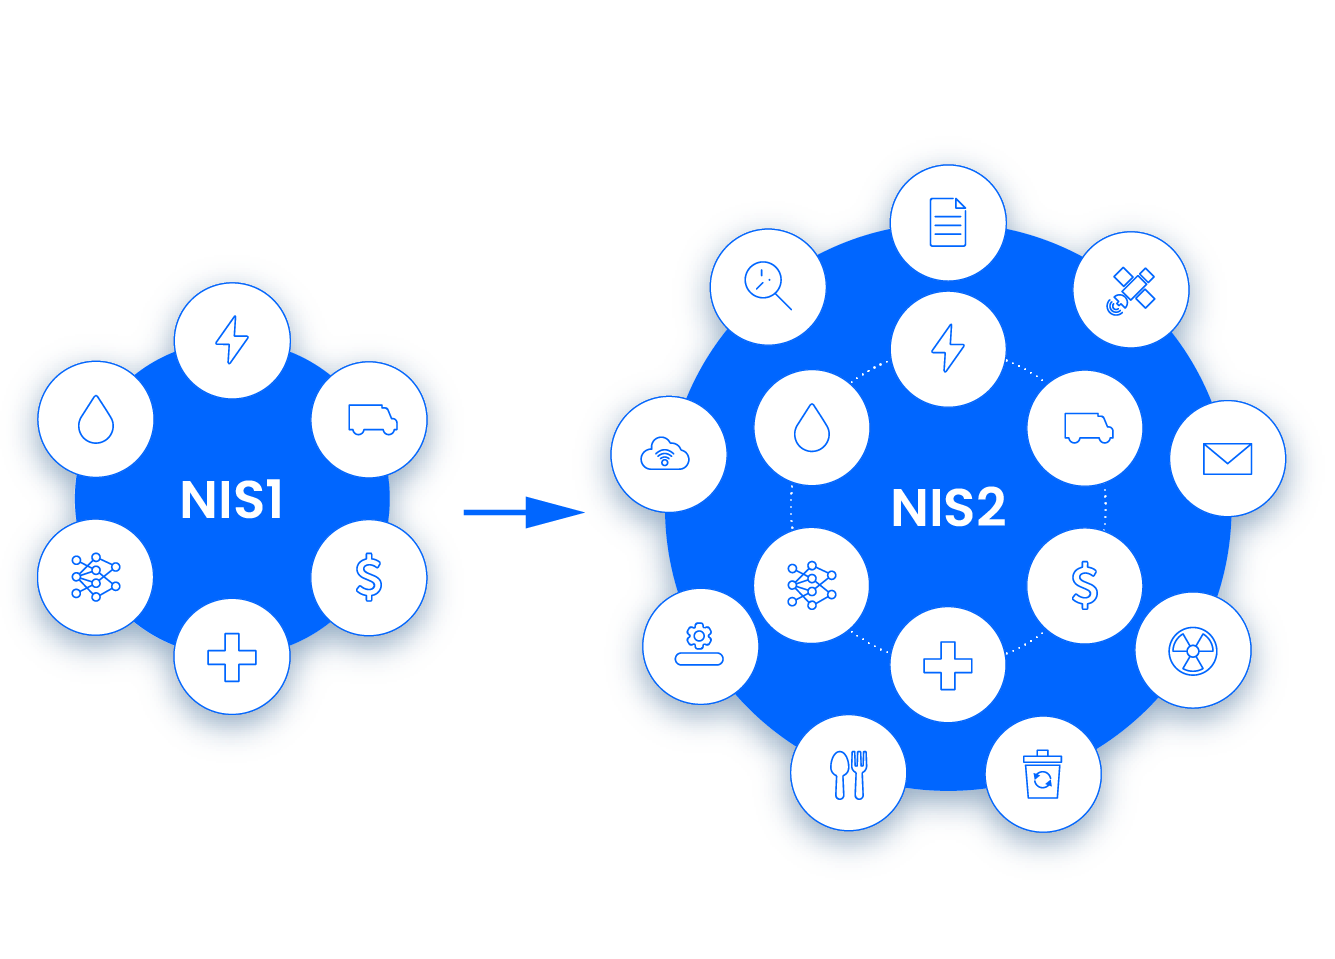 Comparison of sectors covered in NIS1 and NIS2